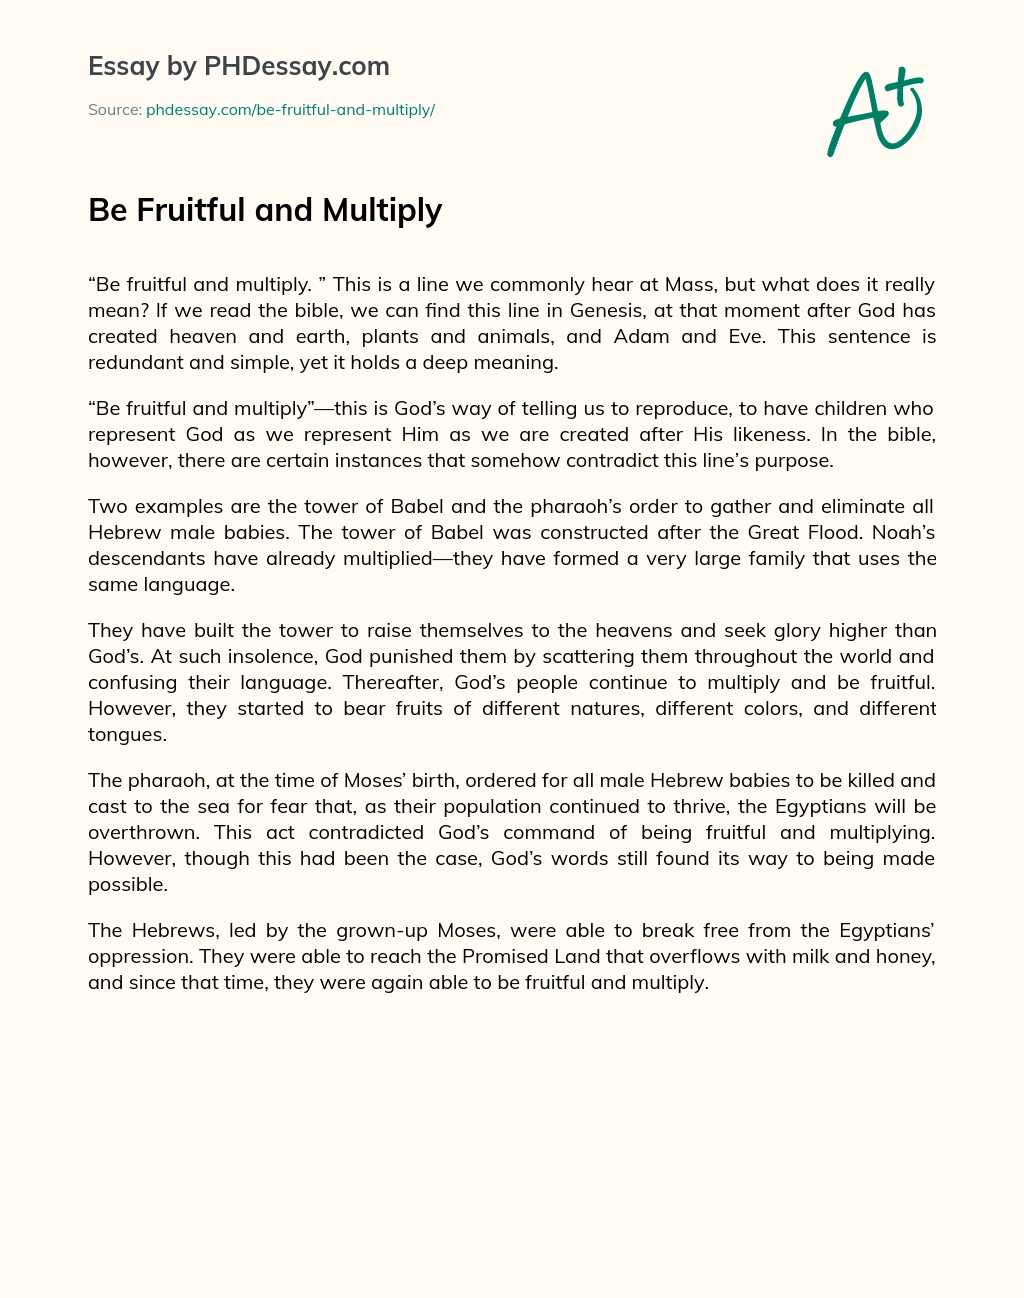 be fruitful and multiply meaning